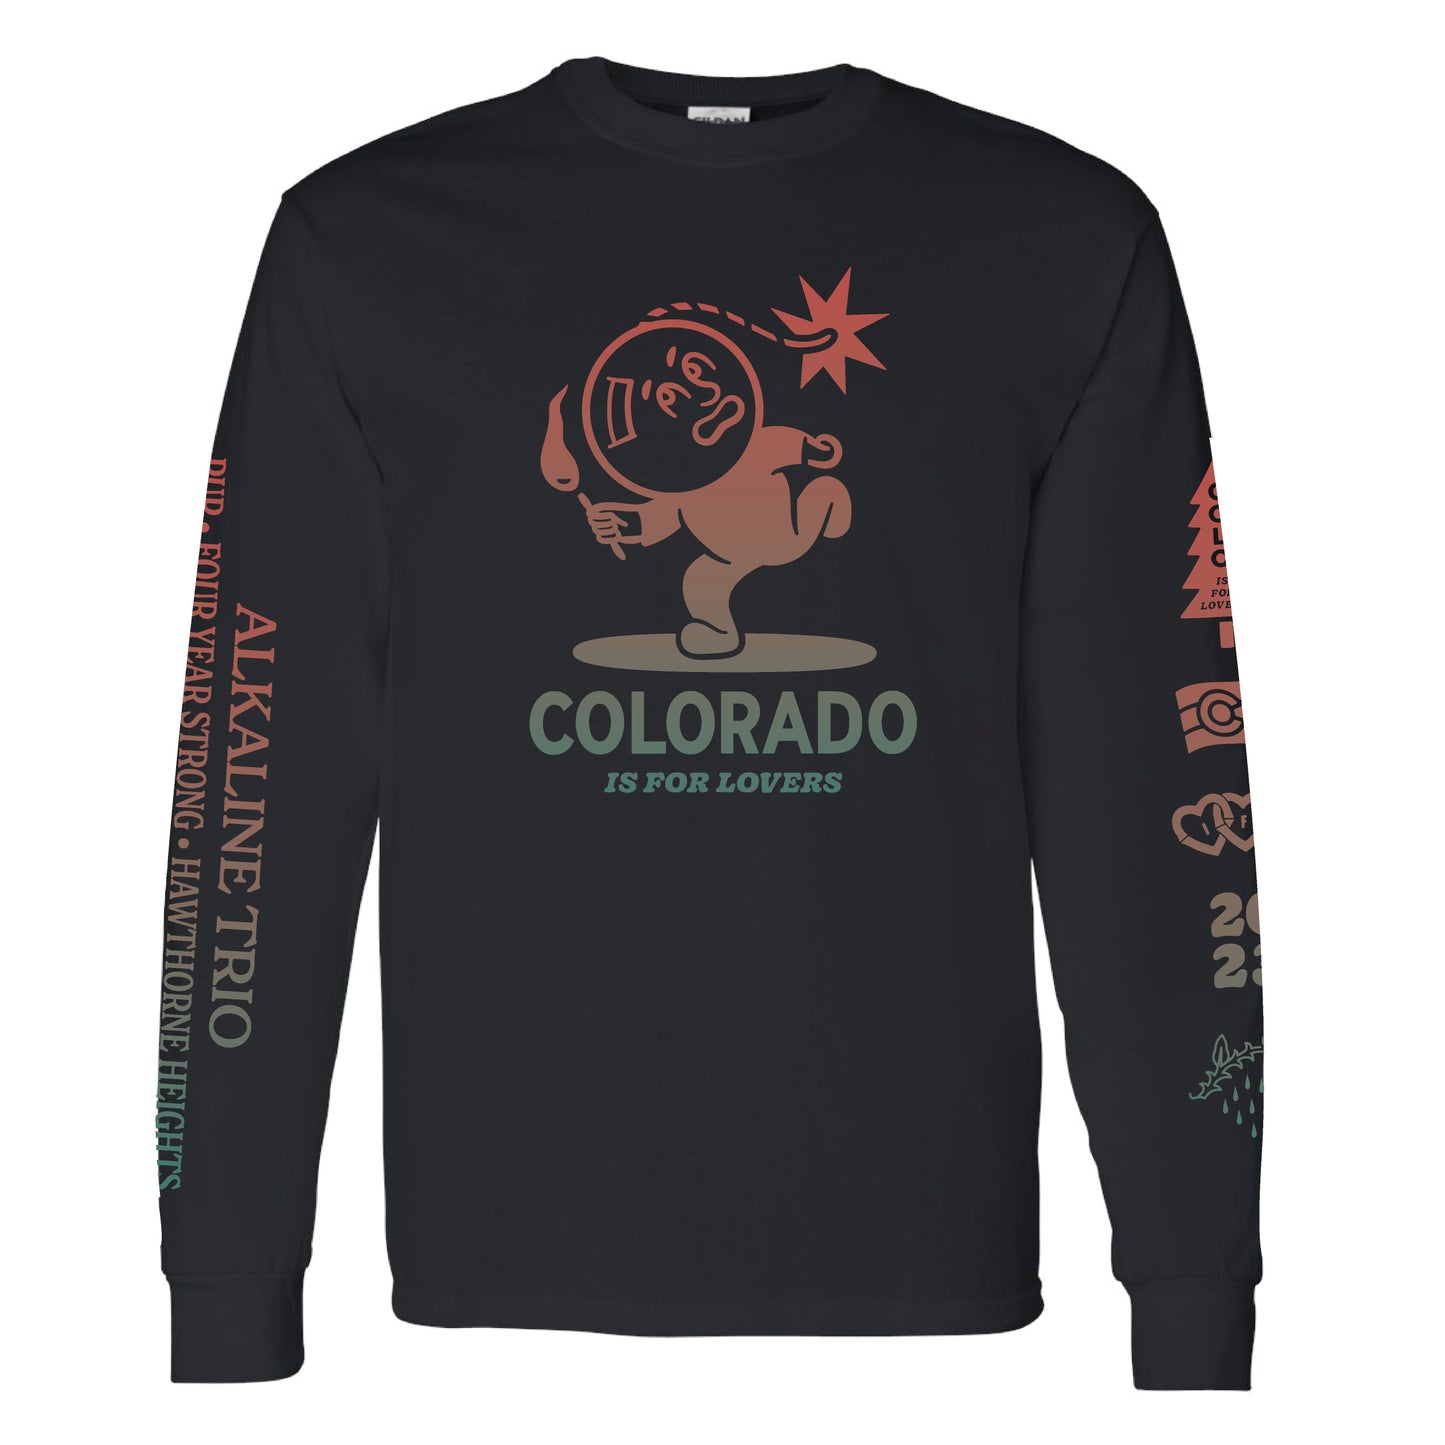 COLORADO Is For Lovers Long Sleeve T Shirt w/ BUMPER STICKER